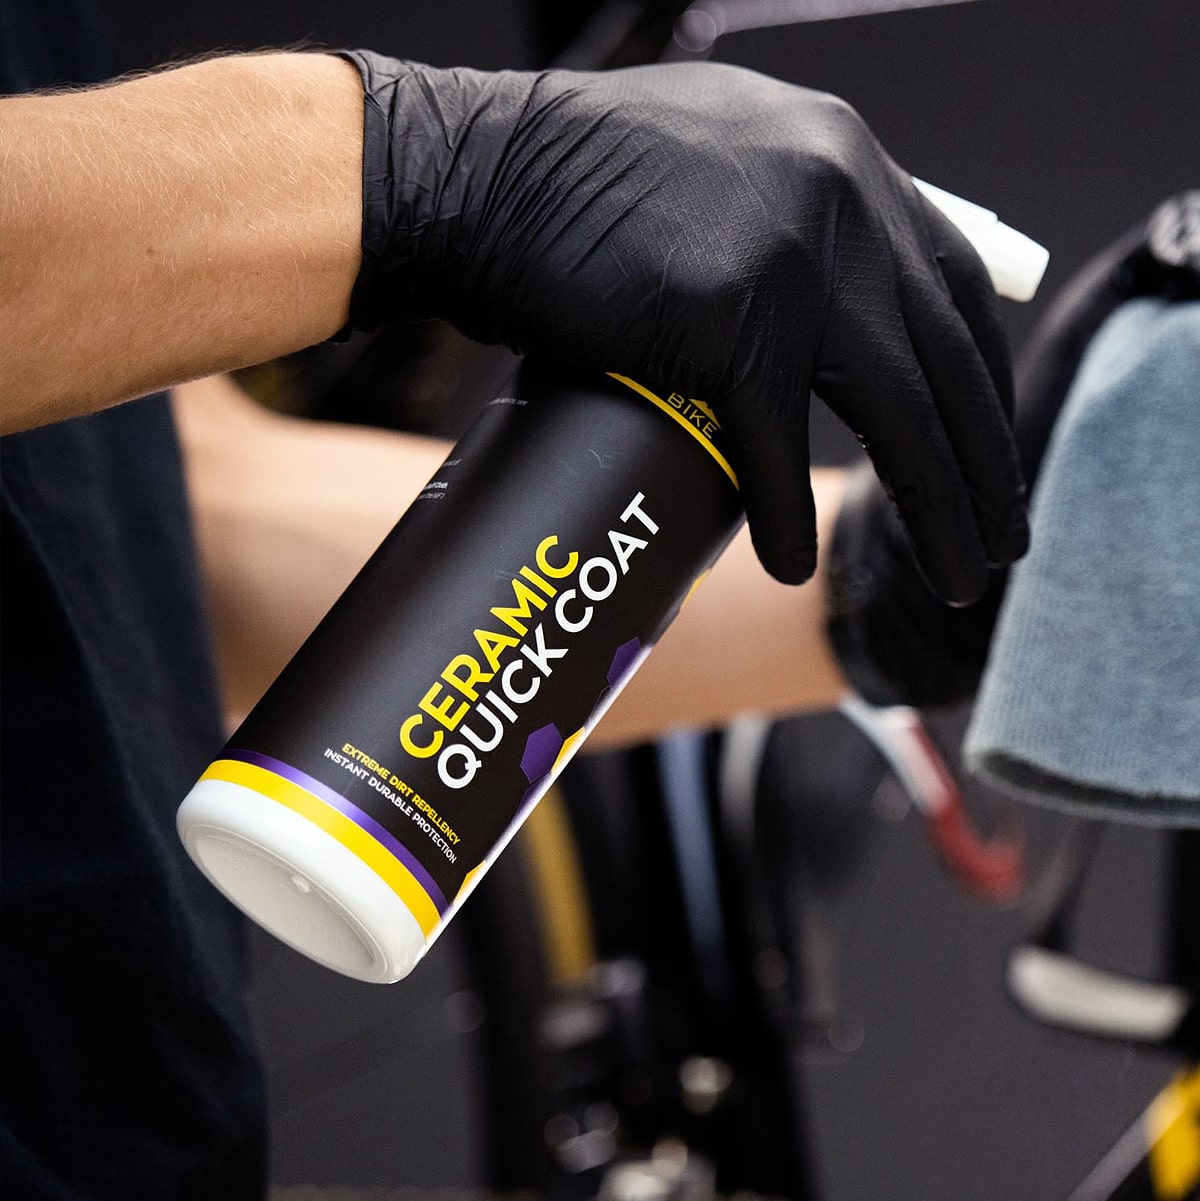 What’s the difference between Bike Ceramic and Ceramic quick coat?